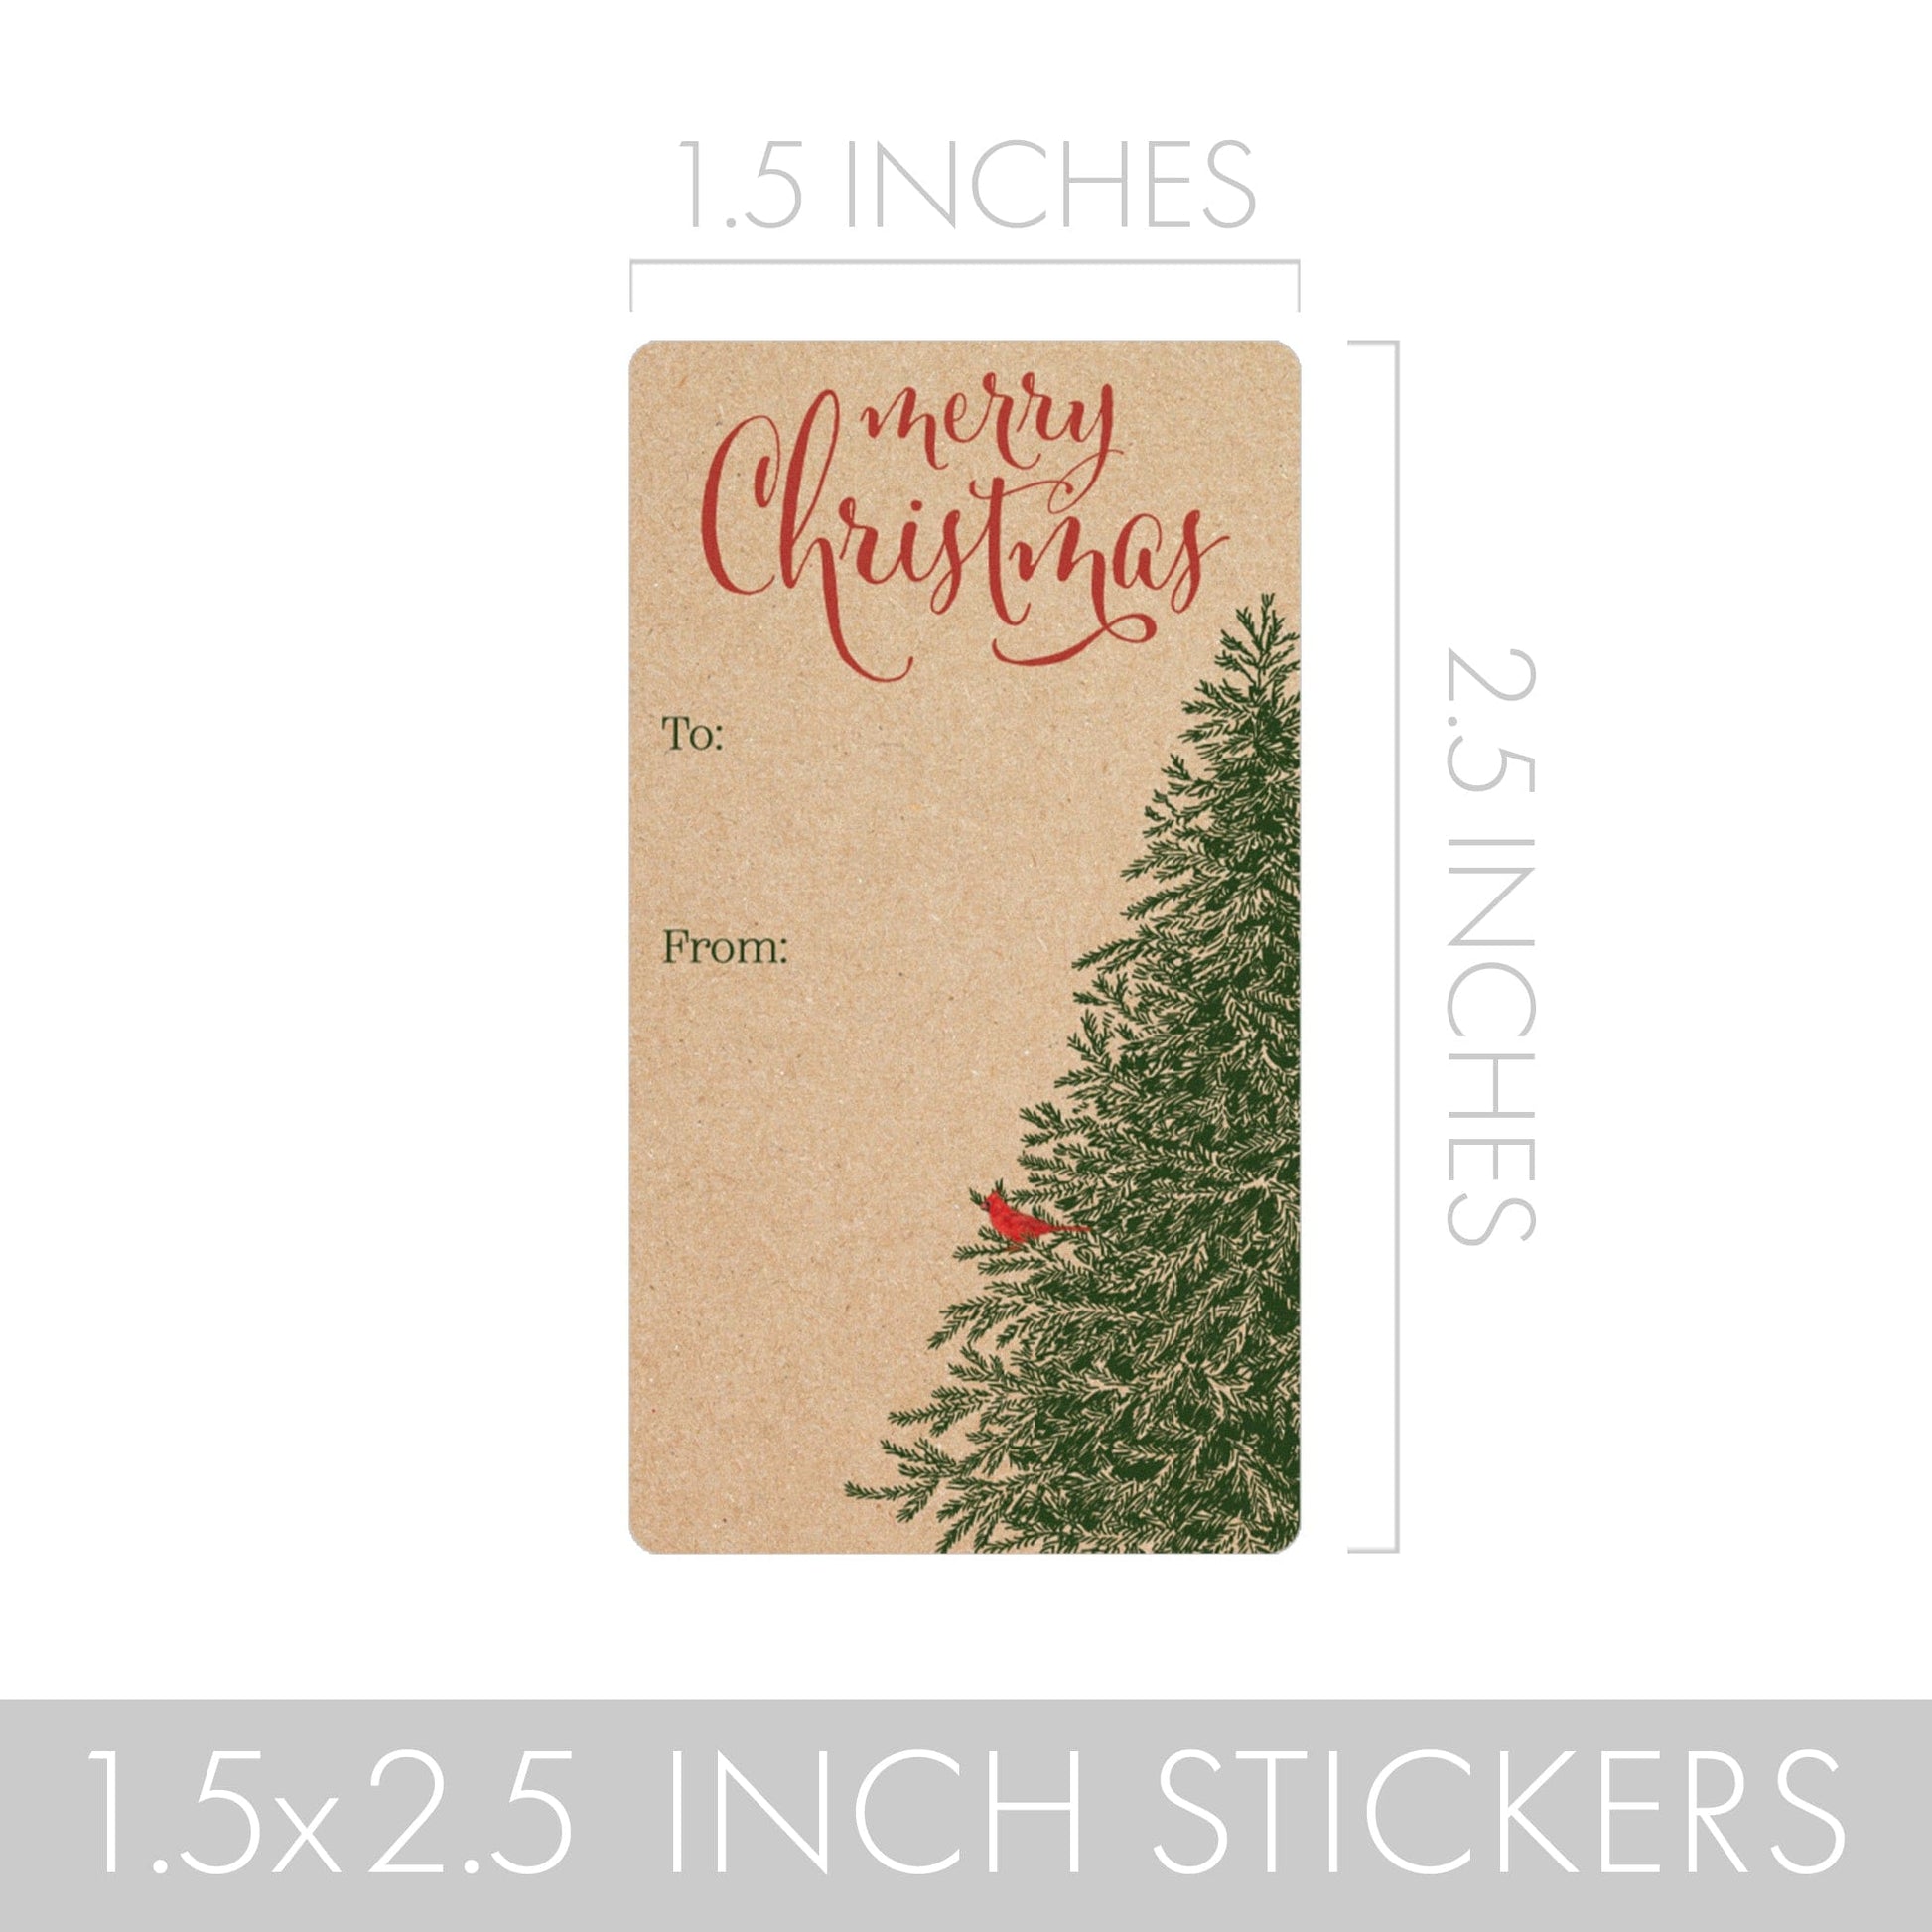 Kraft Christmas Tree Gift Tag Stickers - Pine Trees and Red Cardinals - 75 Count